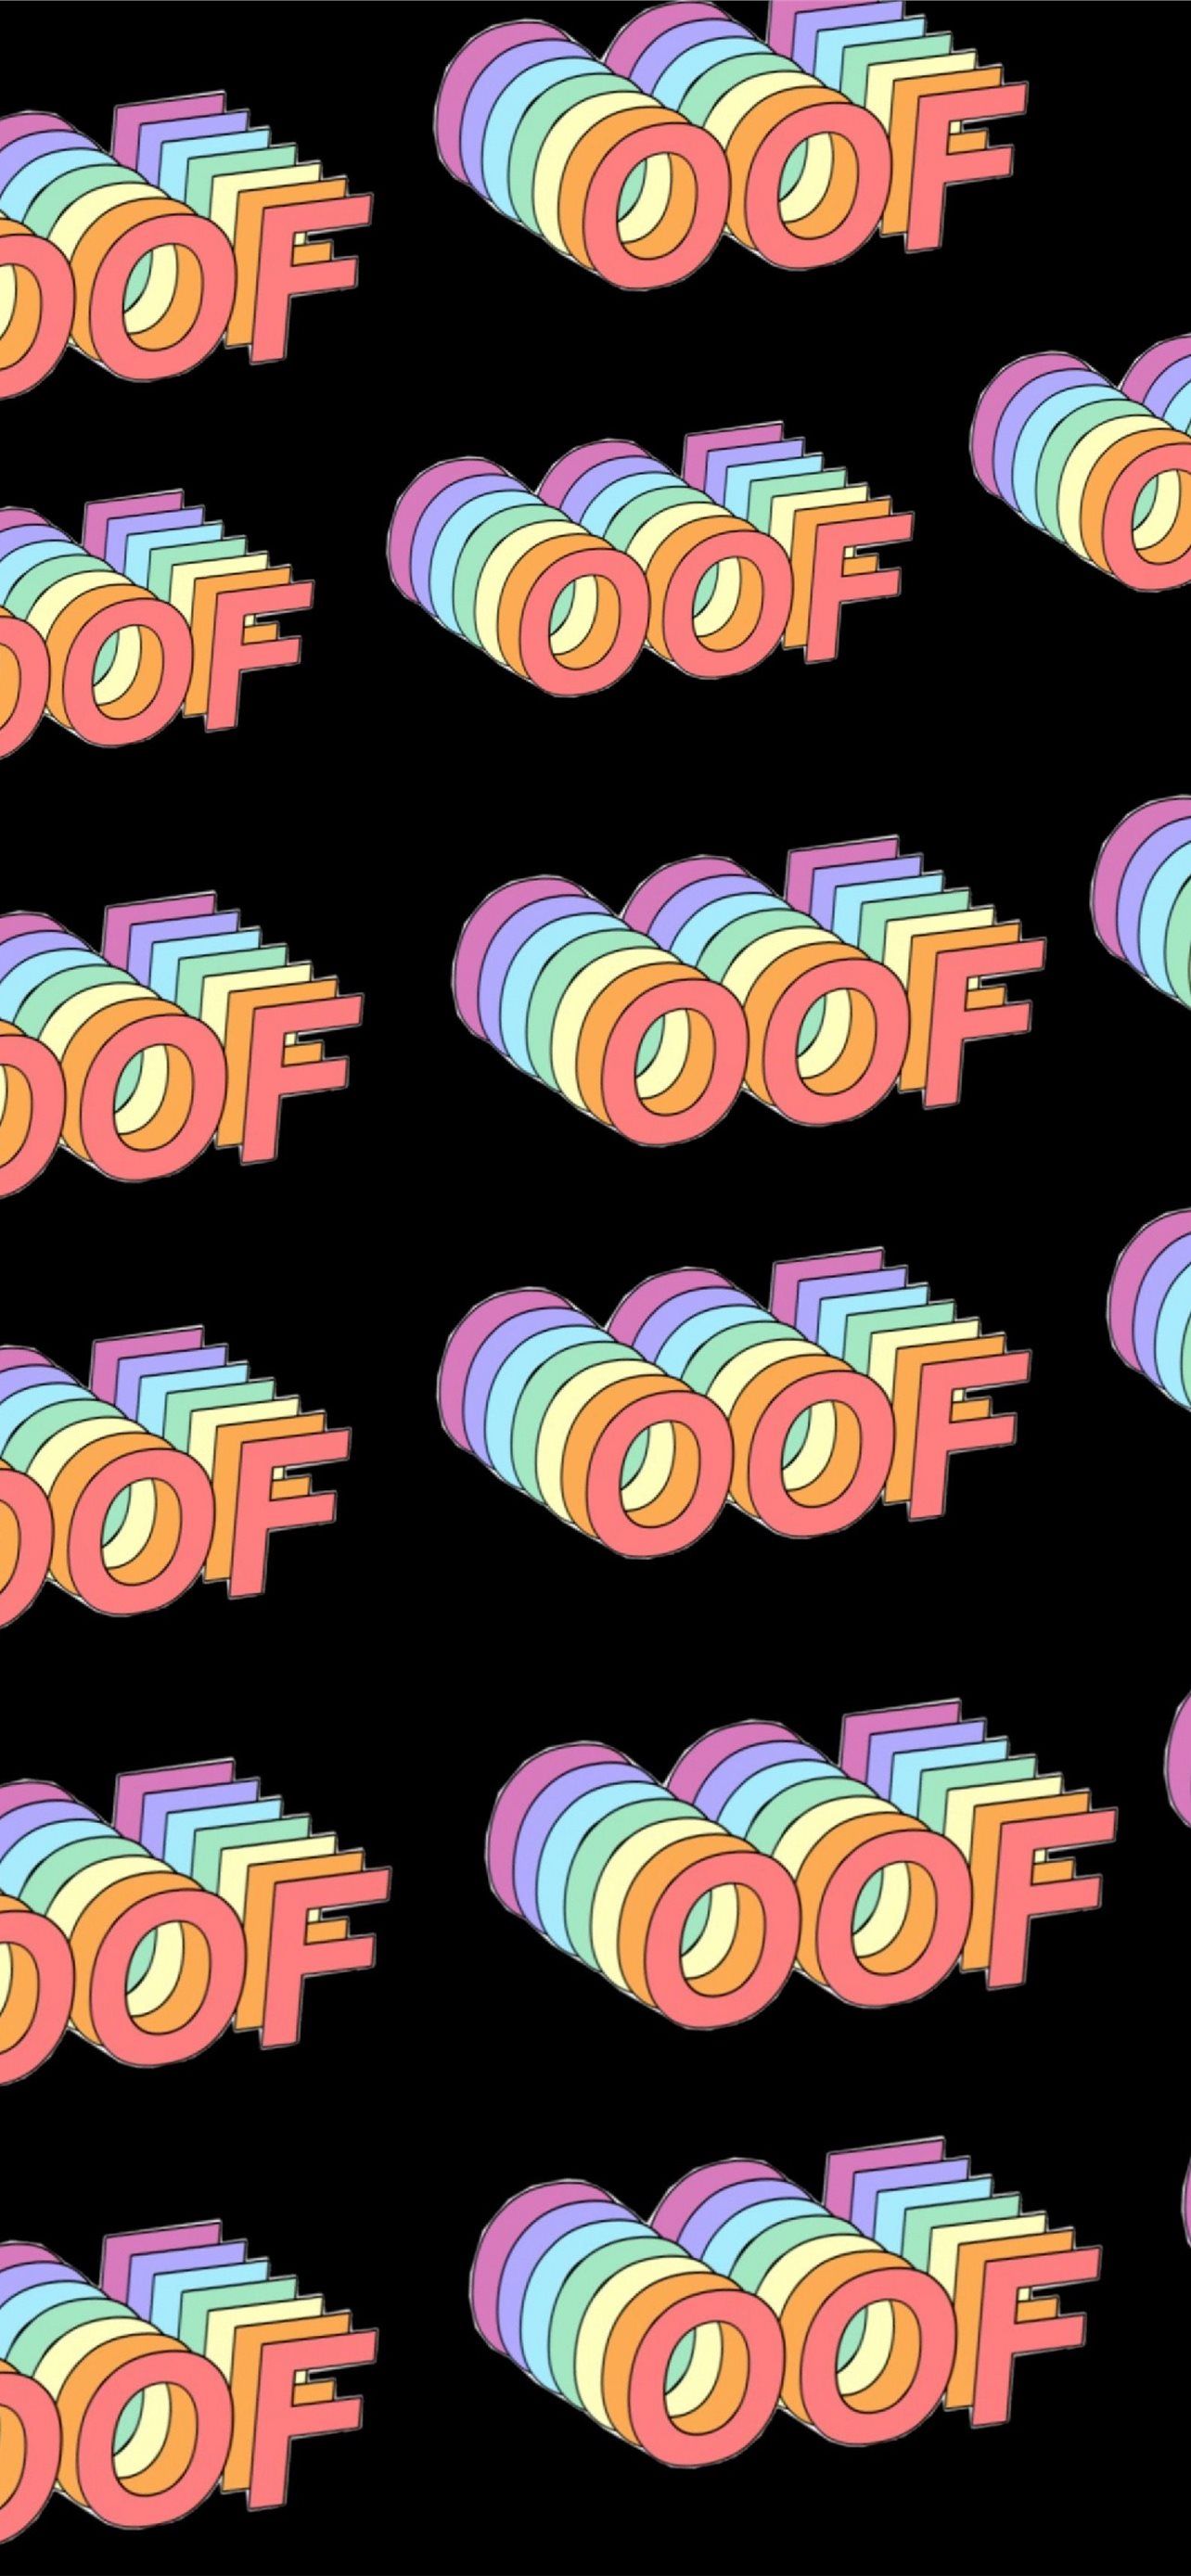 A pattern of rainbow colored letters that say oof - VSCO